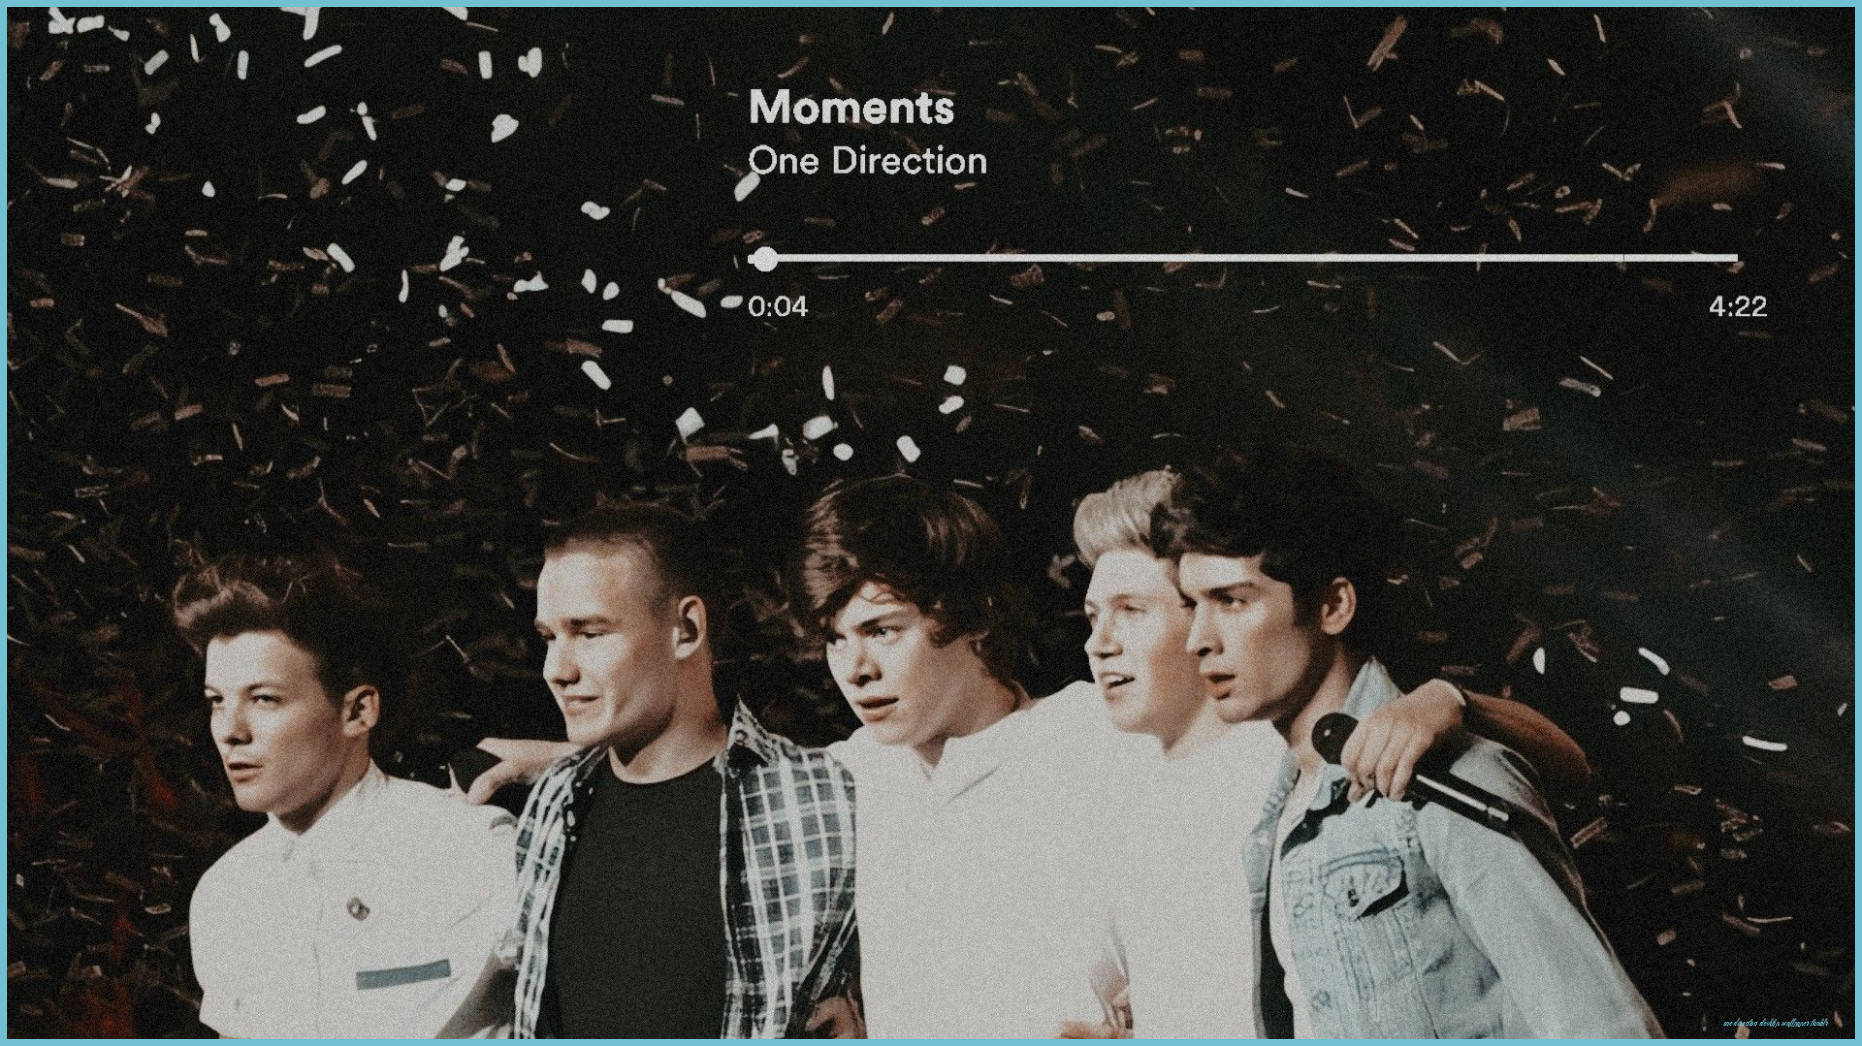 Download One Direction Aesthetic Moments Wallpaper